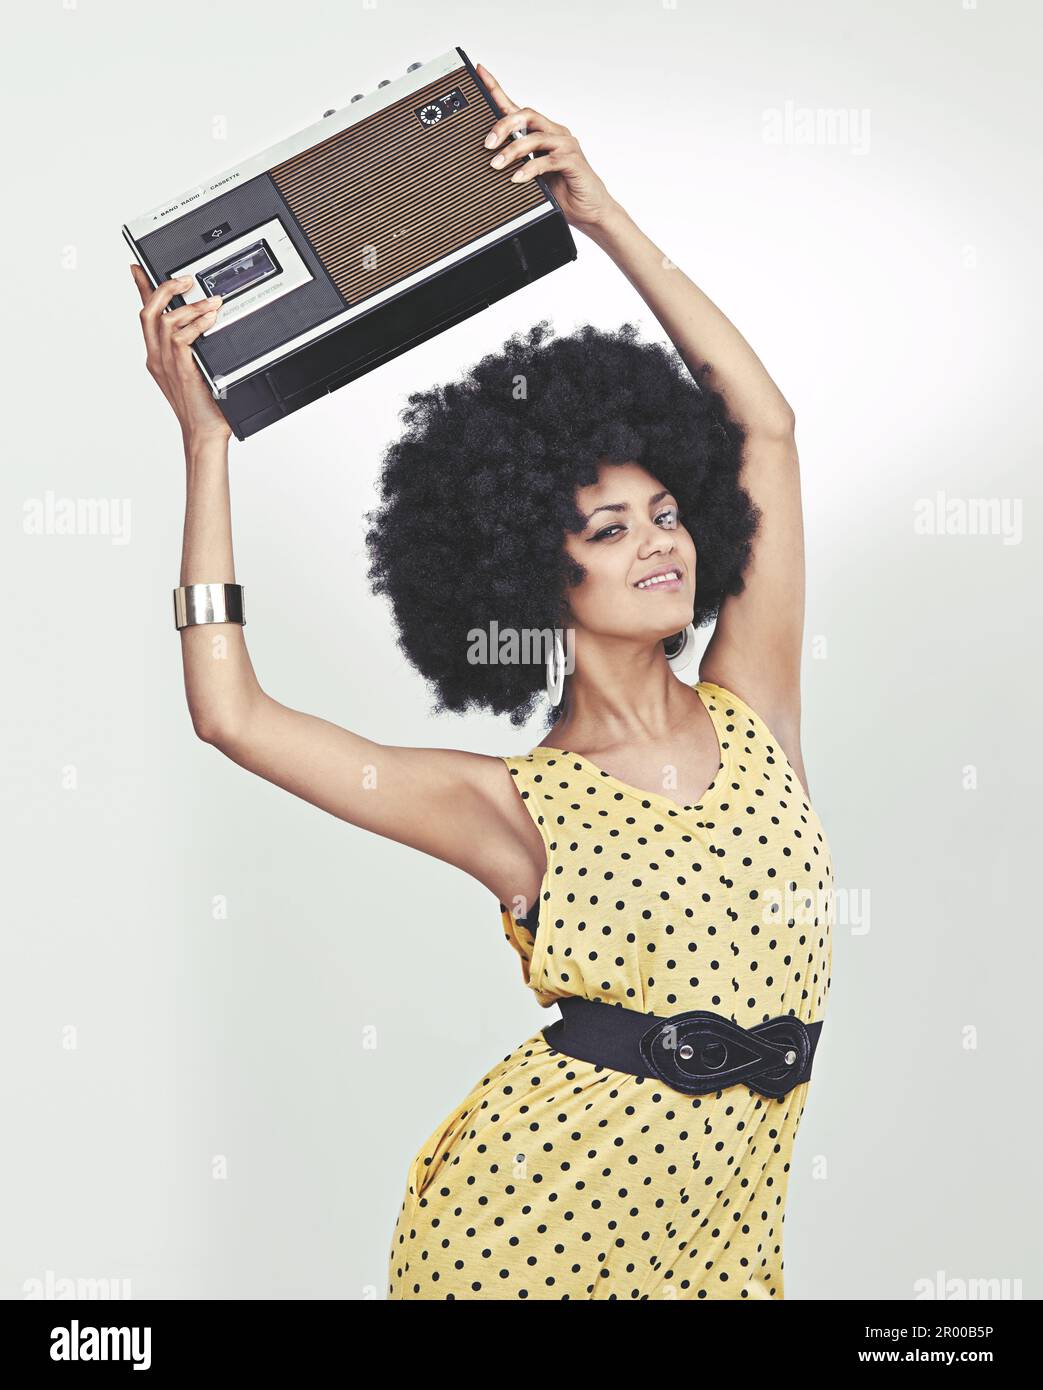 Moving to the groove. A young woman wearing a 70s retro jumpsuit holding a cassette player and striking a disco pose. Stock Photo